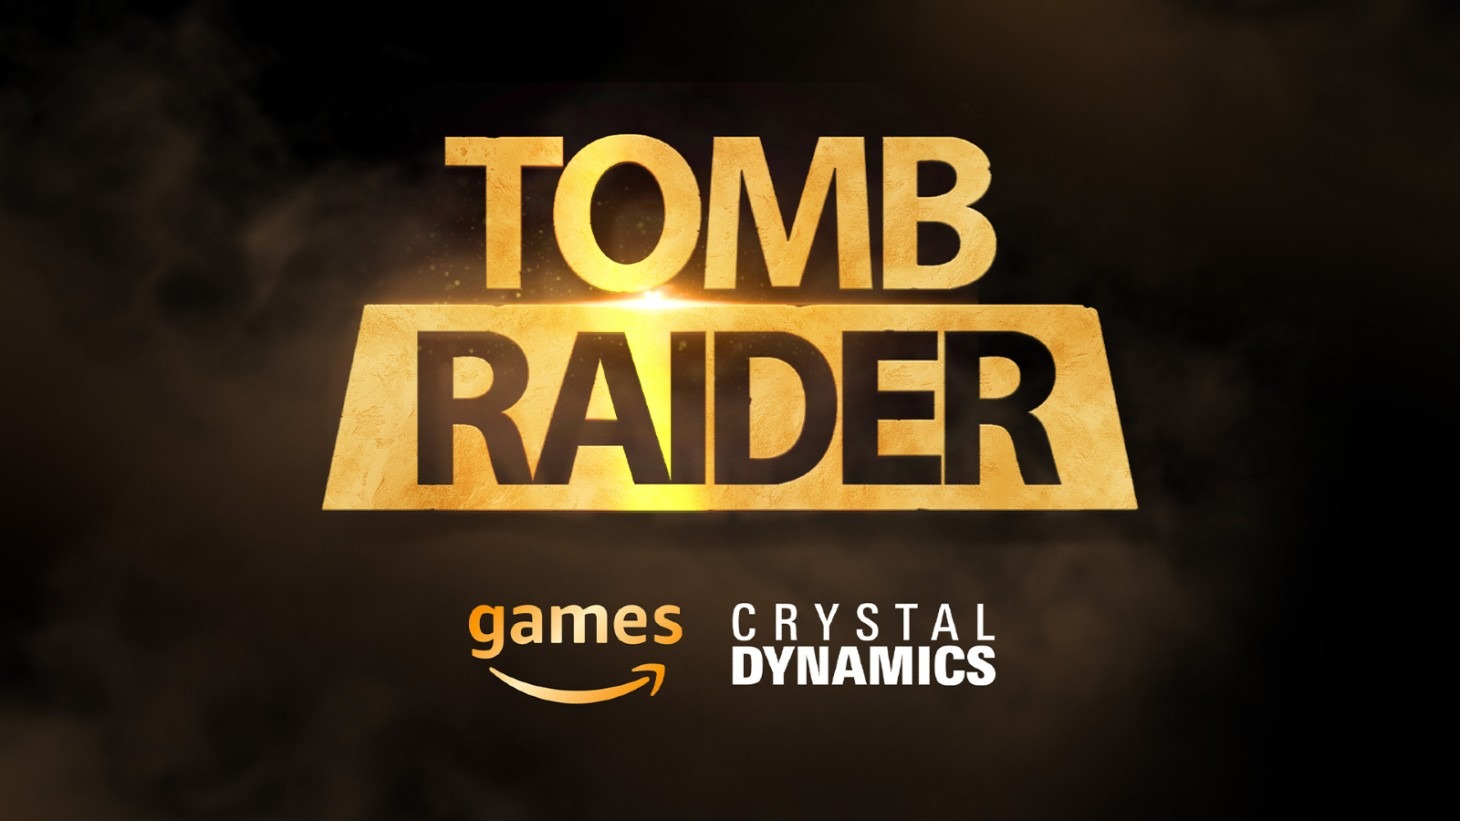 #Tomb Raider: Prime Video Orders Series Based on Iconic Video Game